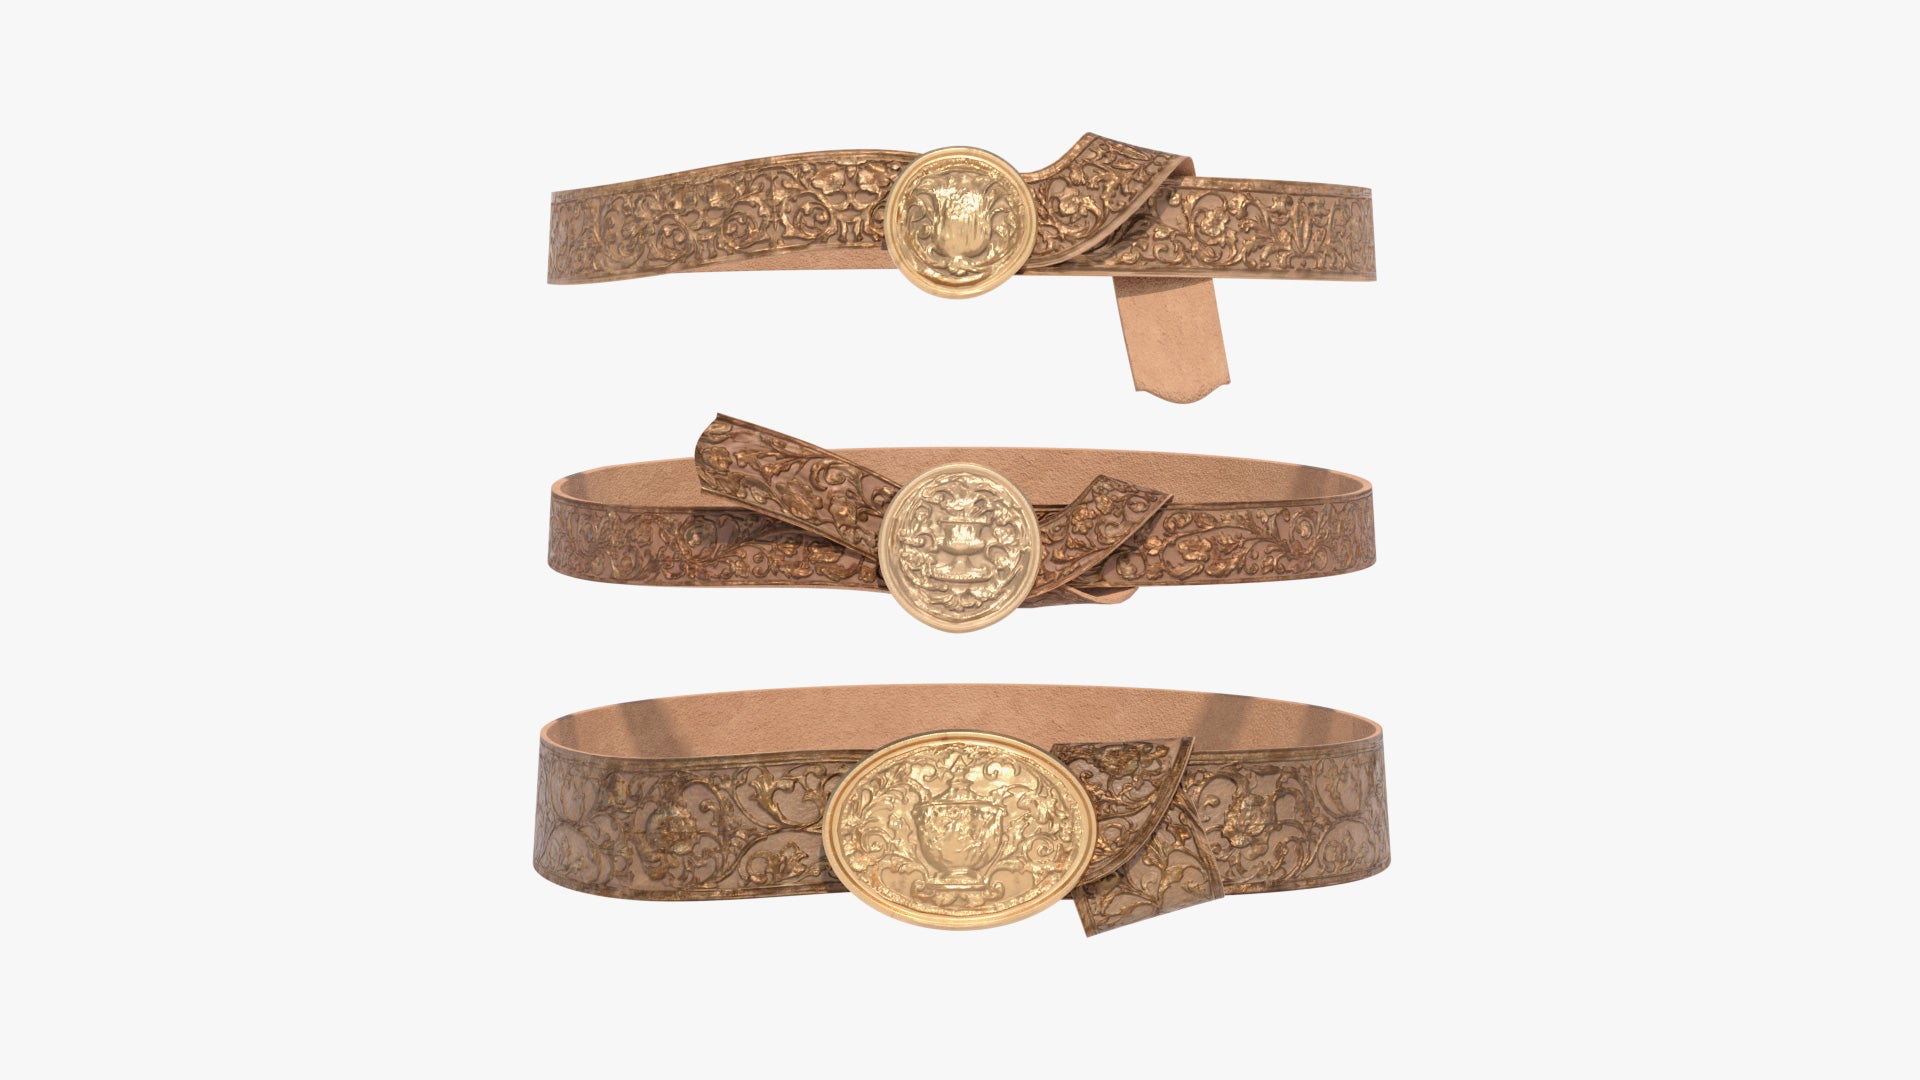 3D model of three belts in medieval fantasy style, inspired by ancient Rome, made with lowpoly and PBR textures